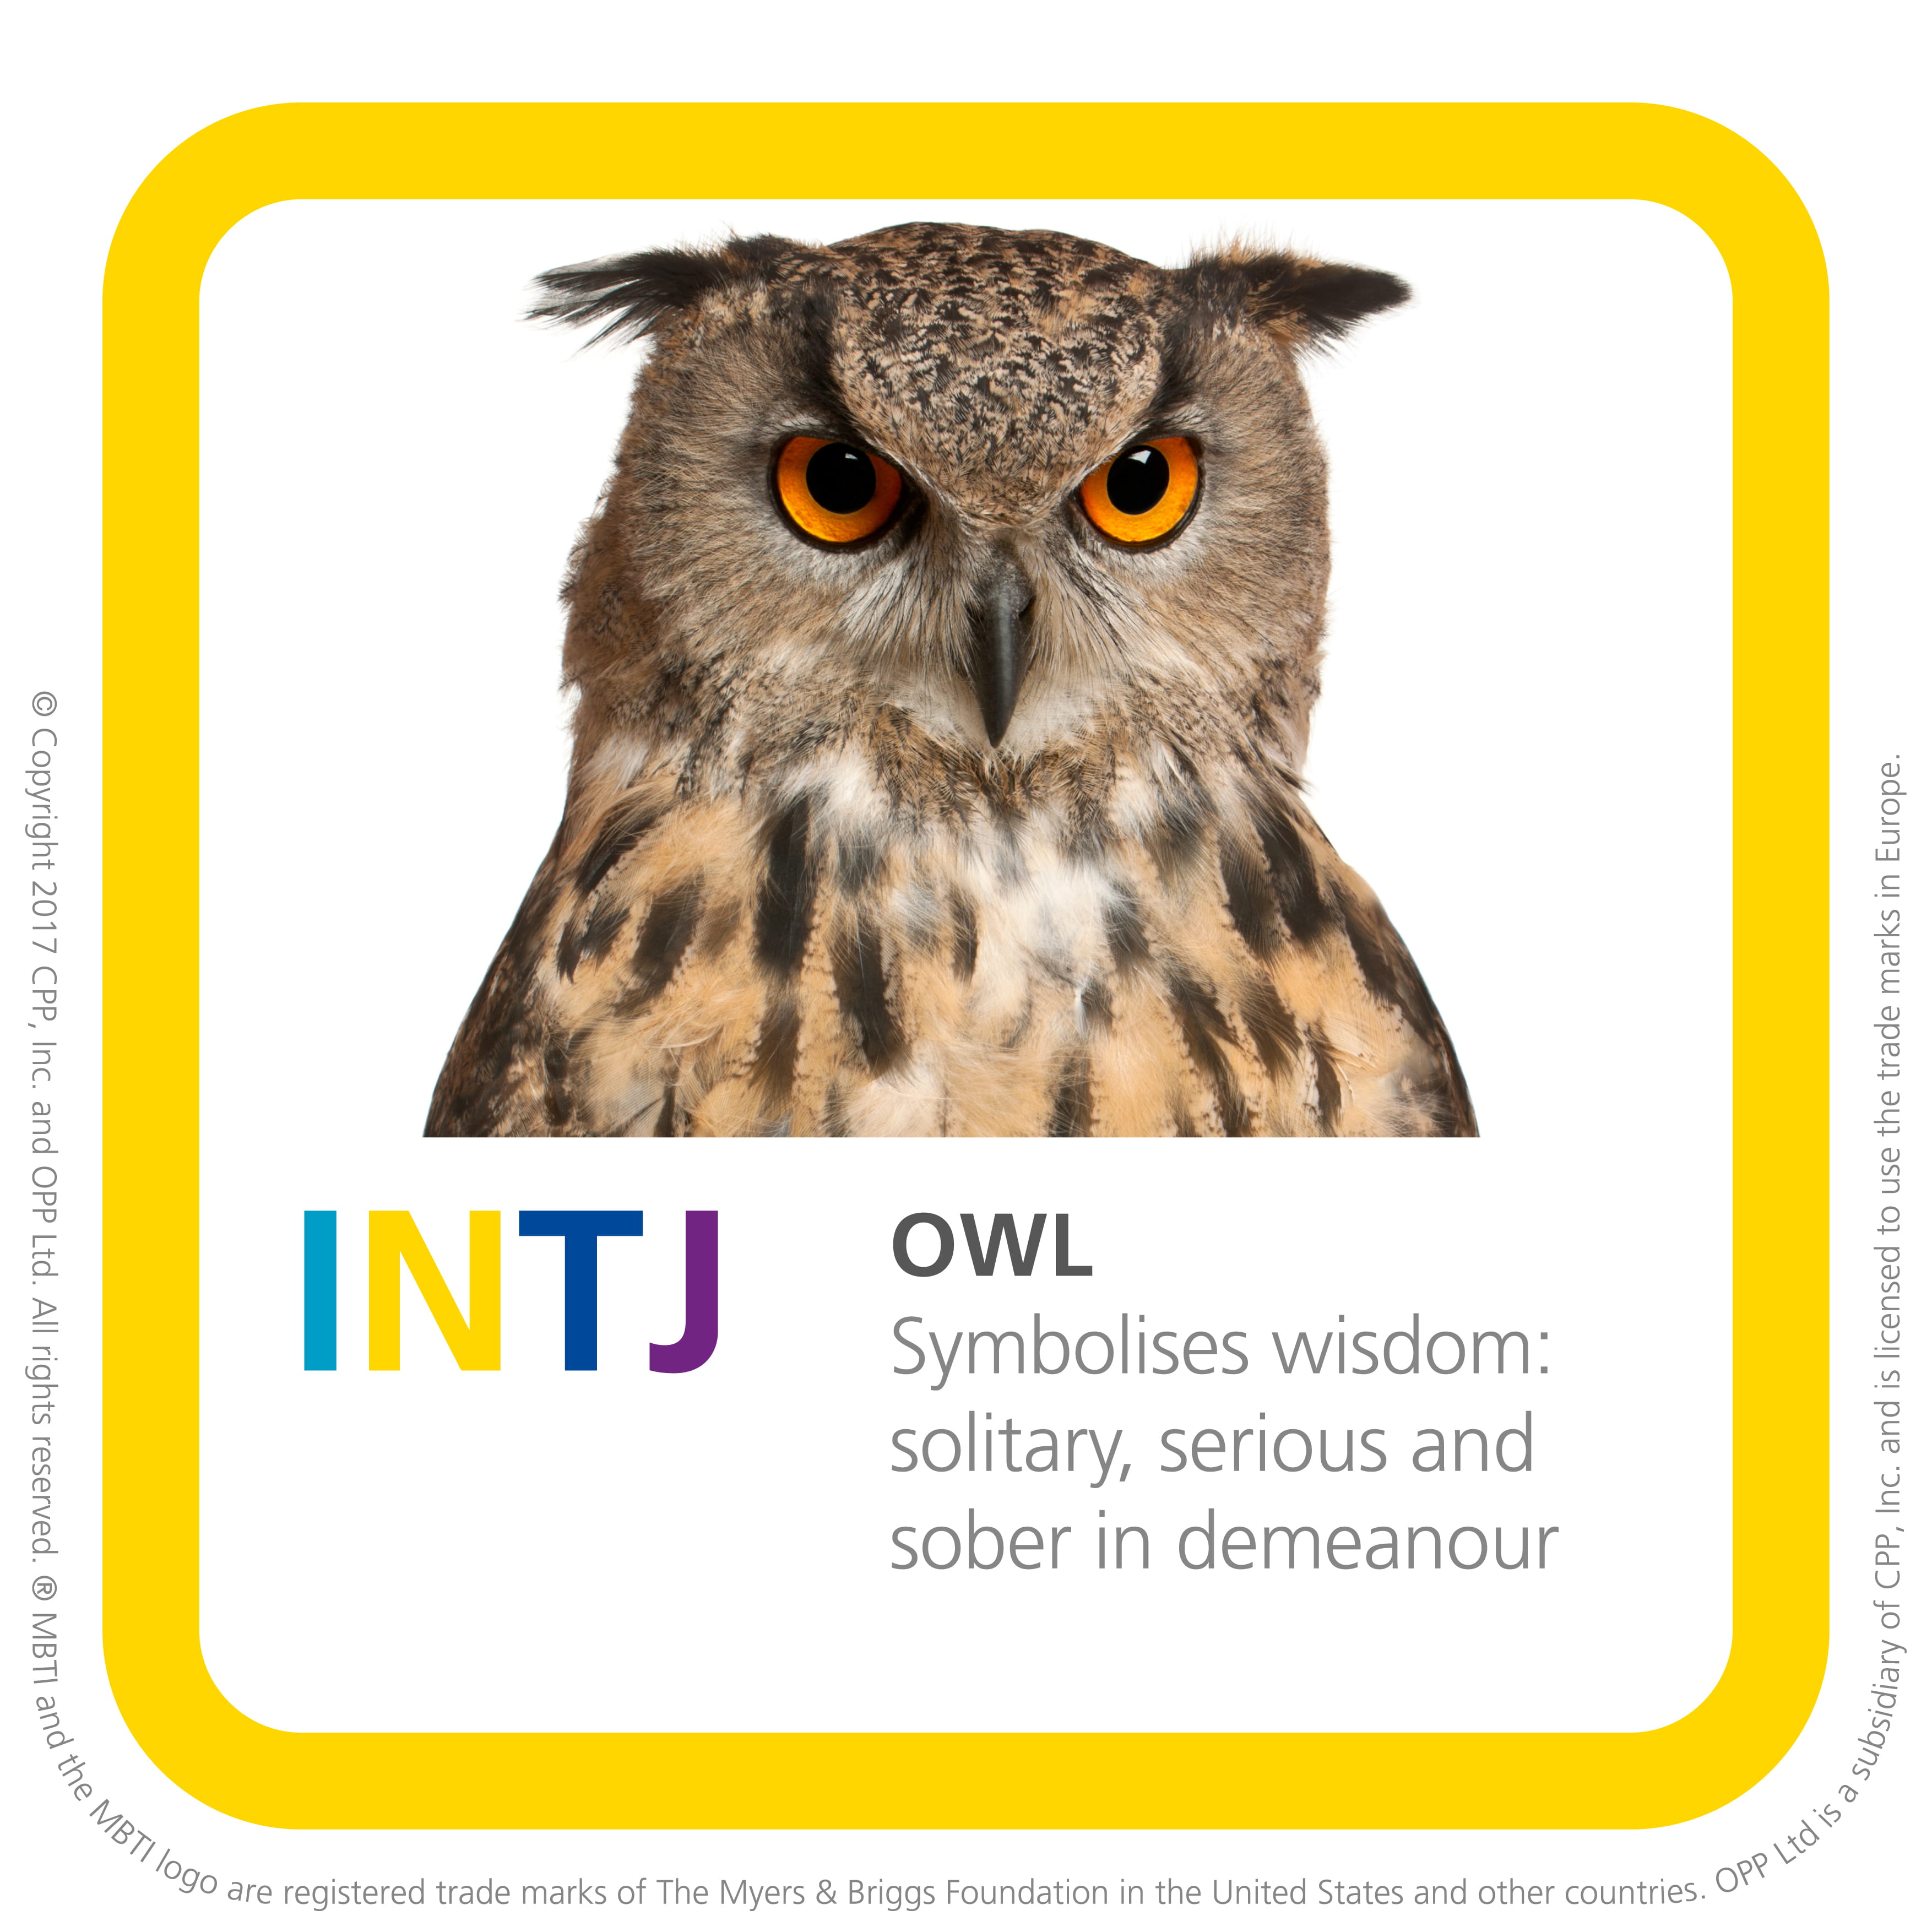 All About the INTJ Personality Type